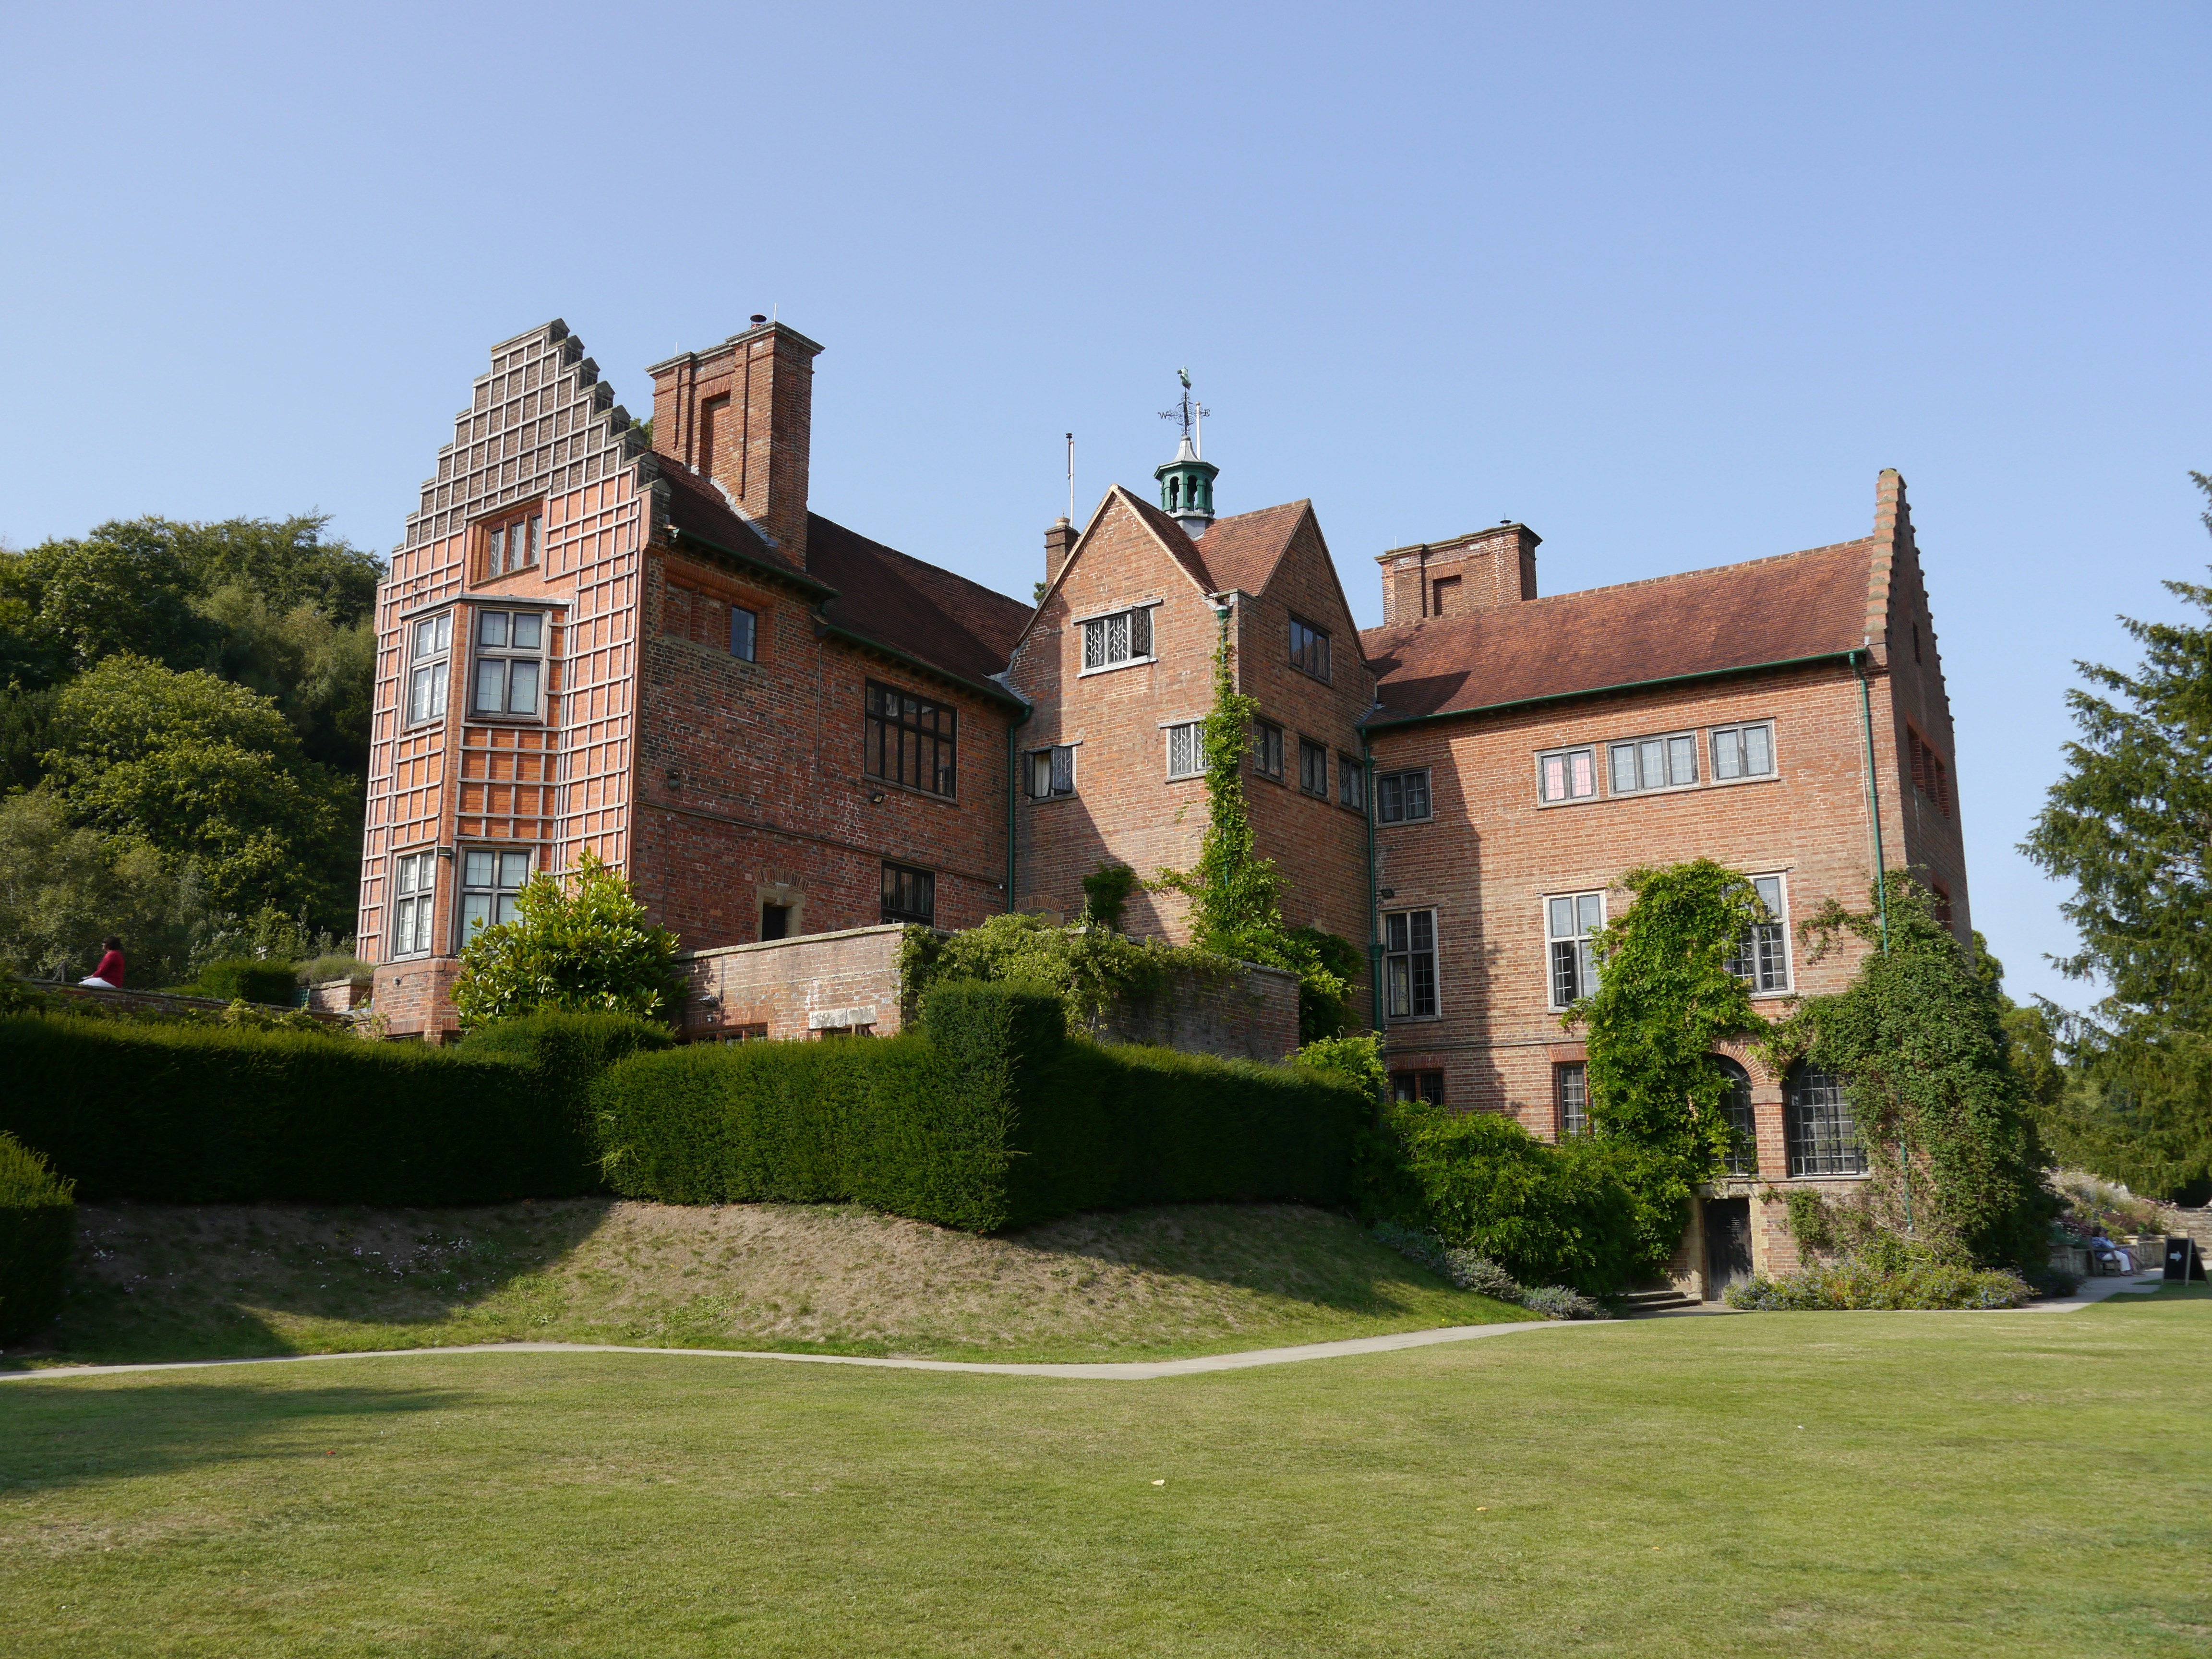 Family home and garden of Sir Winston Churchill